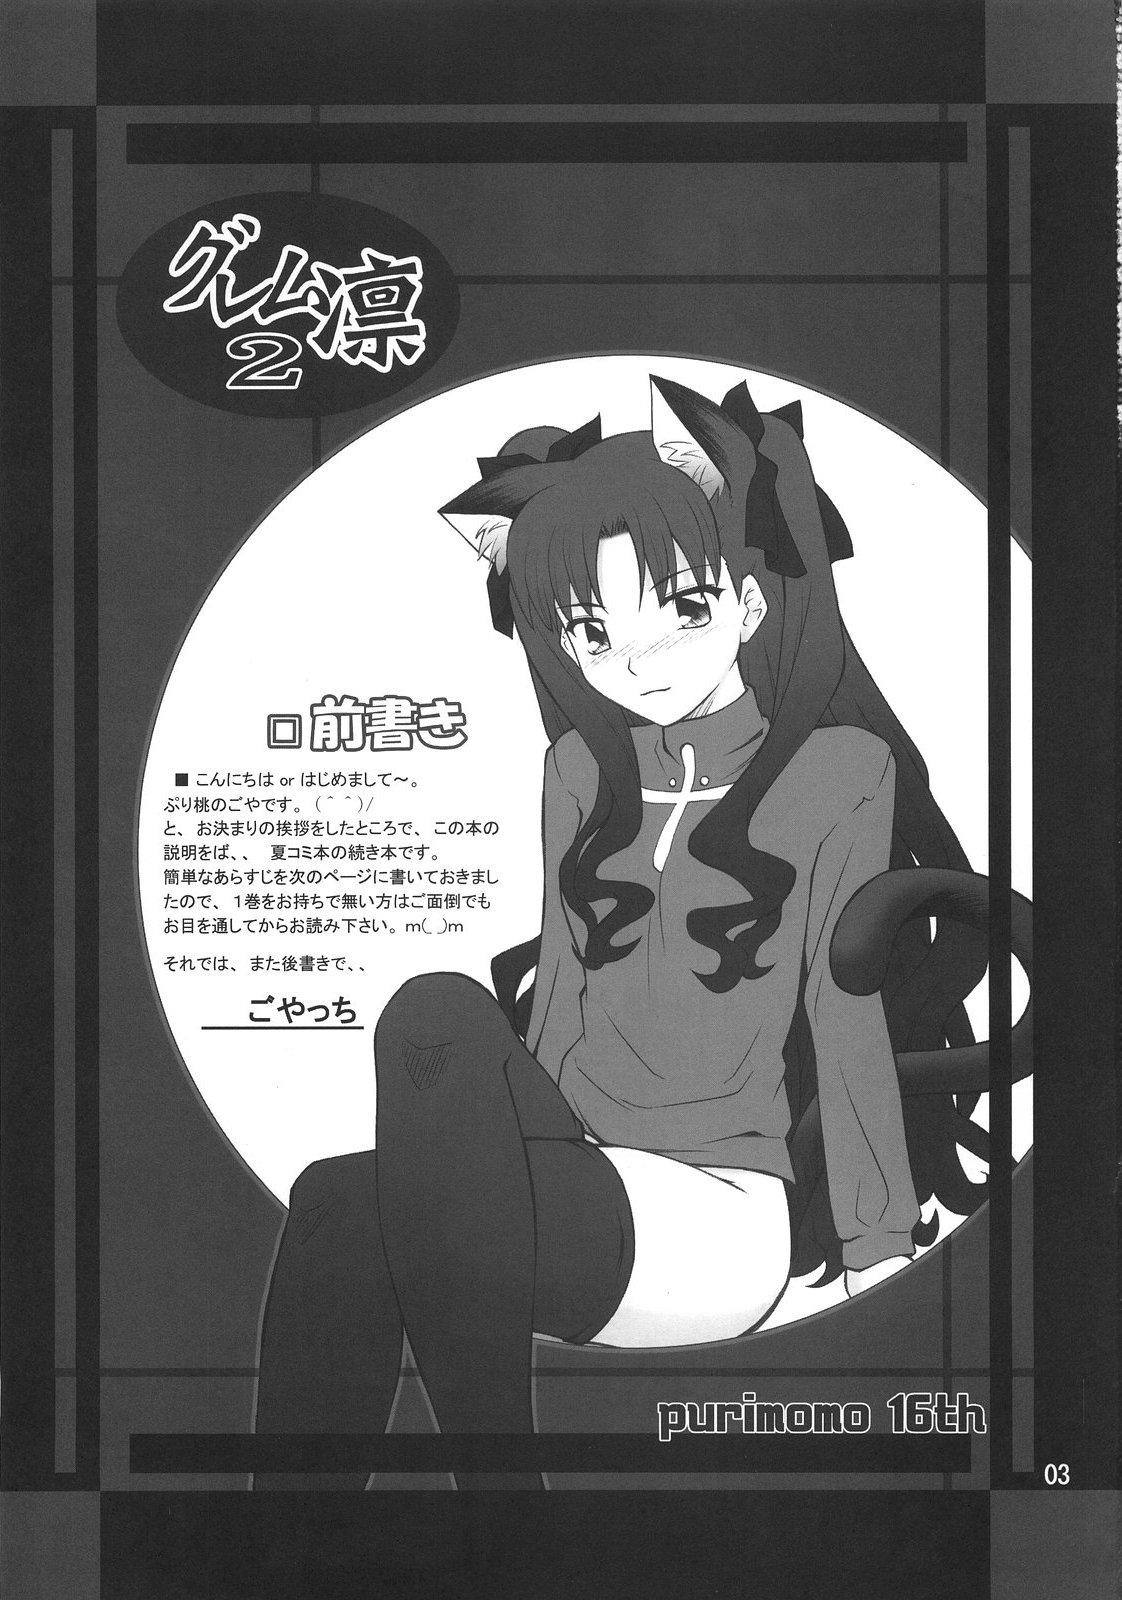 Strap On Grem-Rin 2 - Fate stay night Smalltits - Page 2